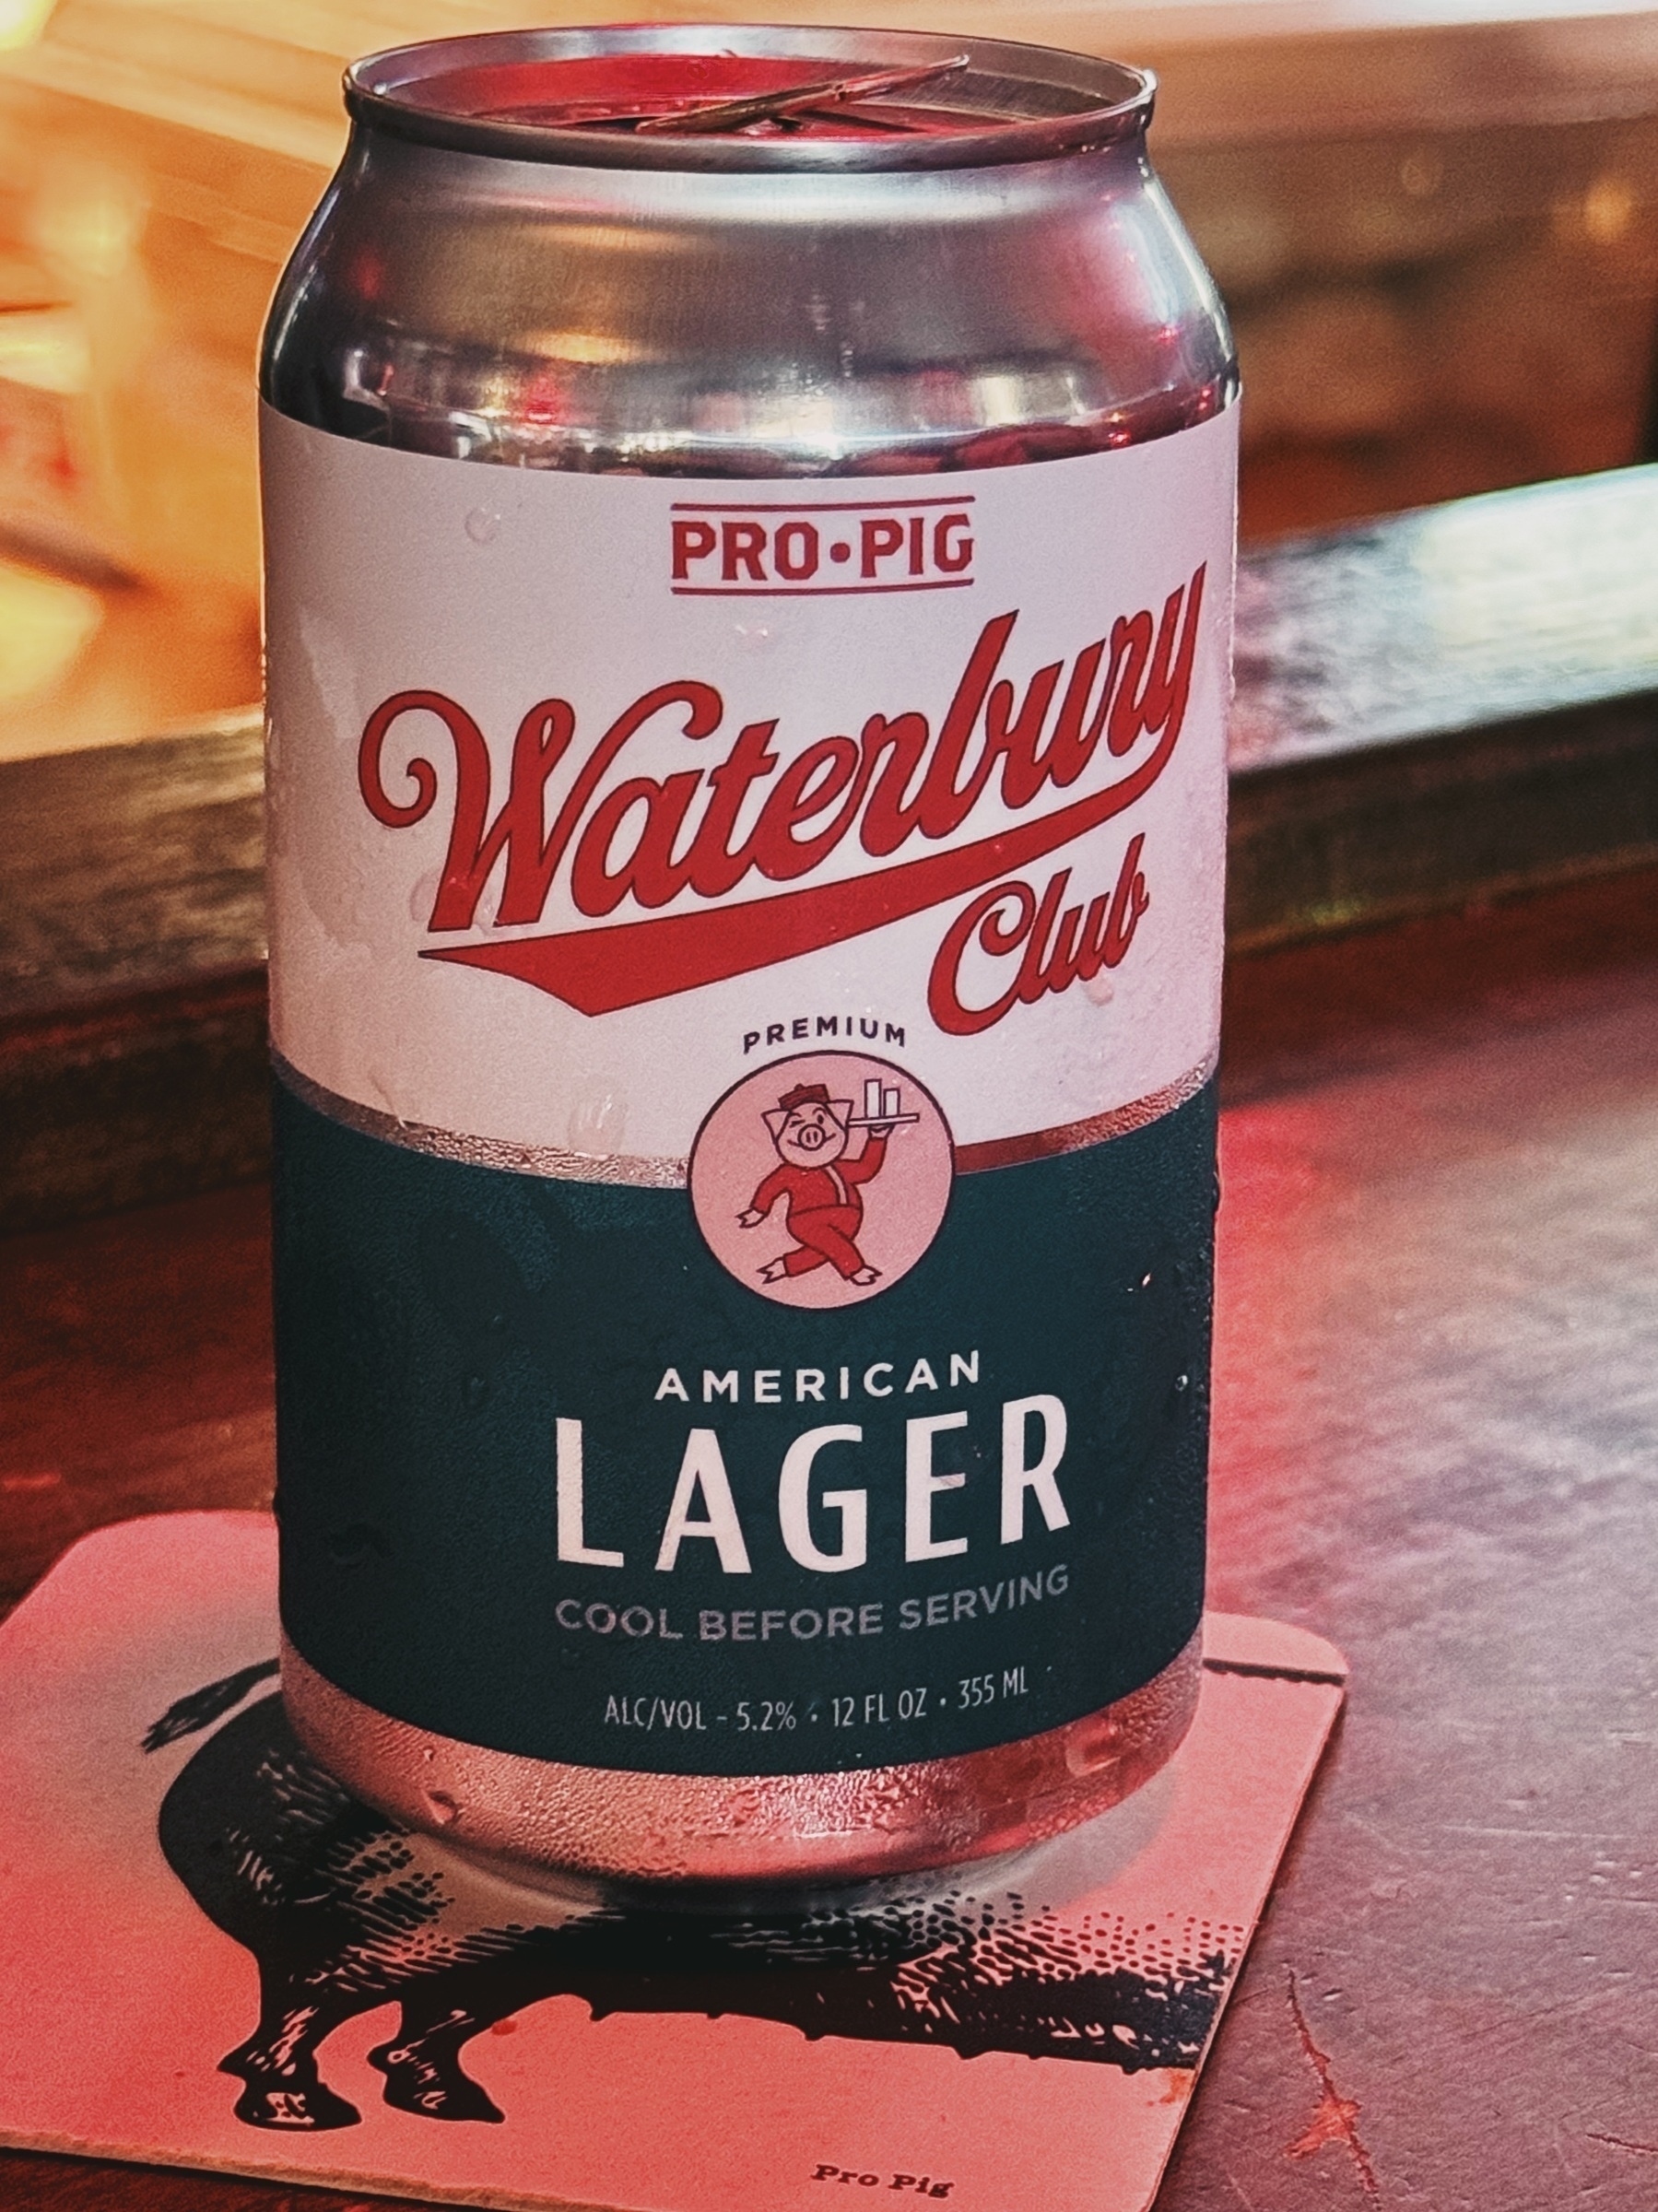 dimly lit can of beer with red cursive text called Waterbury Club Lager on a wood bar top